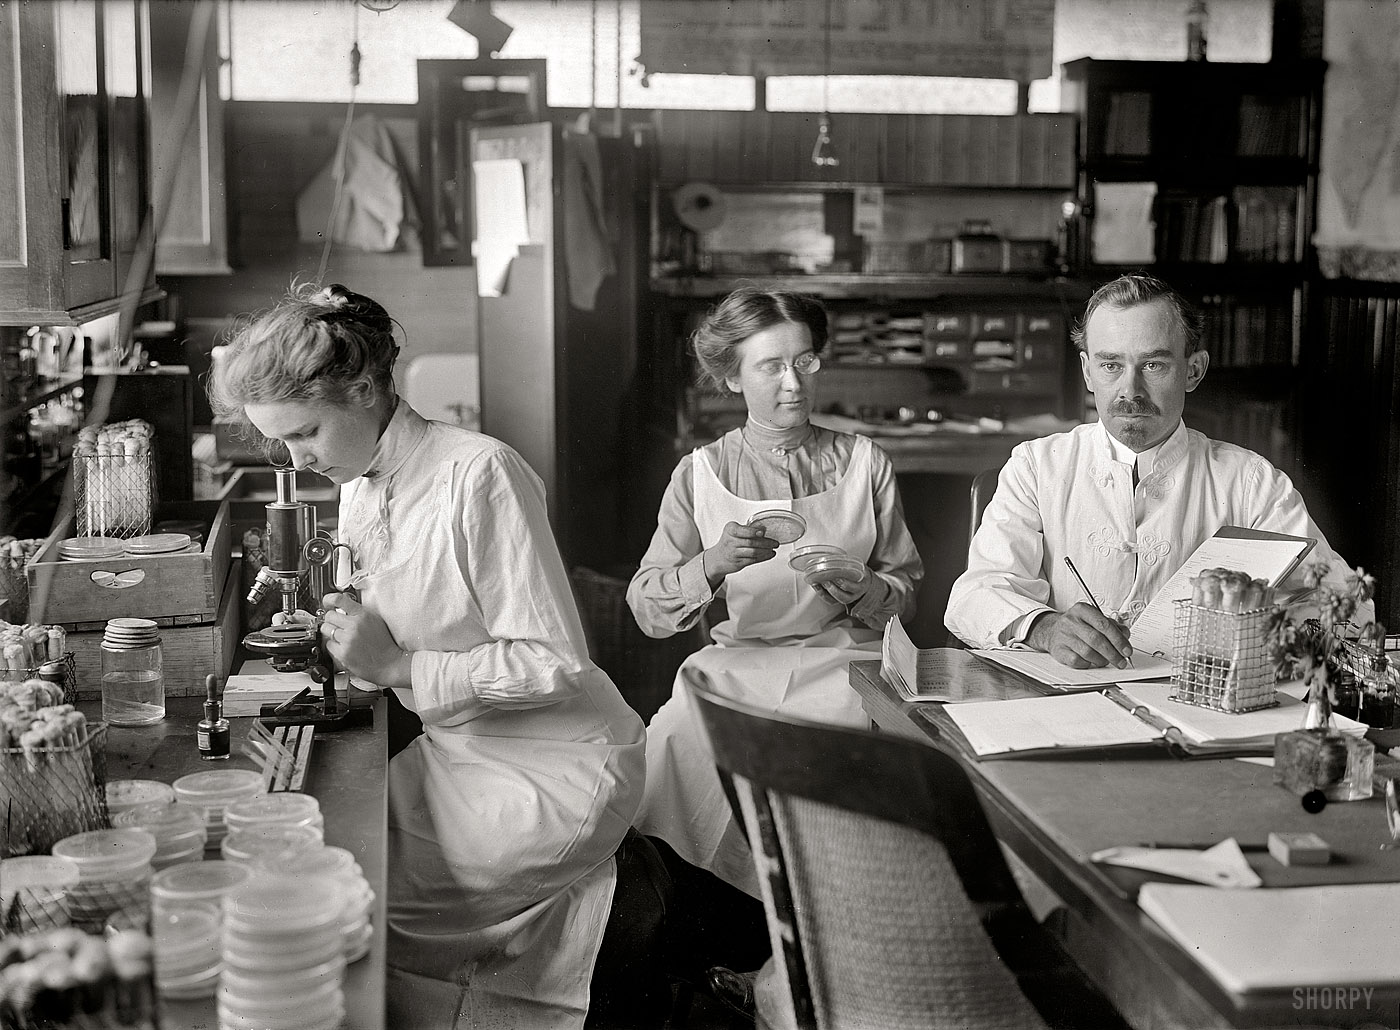 1912. "Dr. George Stiles. Bacteriologist at George Washington University who was supposed to have discovered a TB germ." Harris & Ewing. View full size.